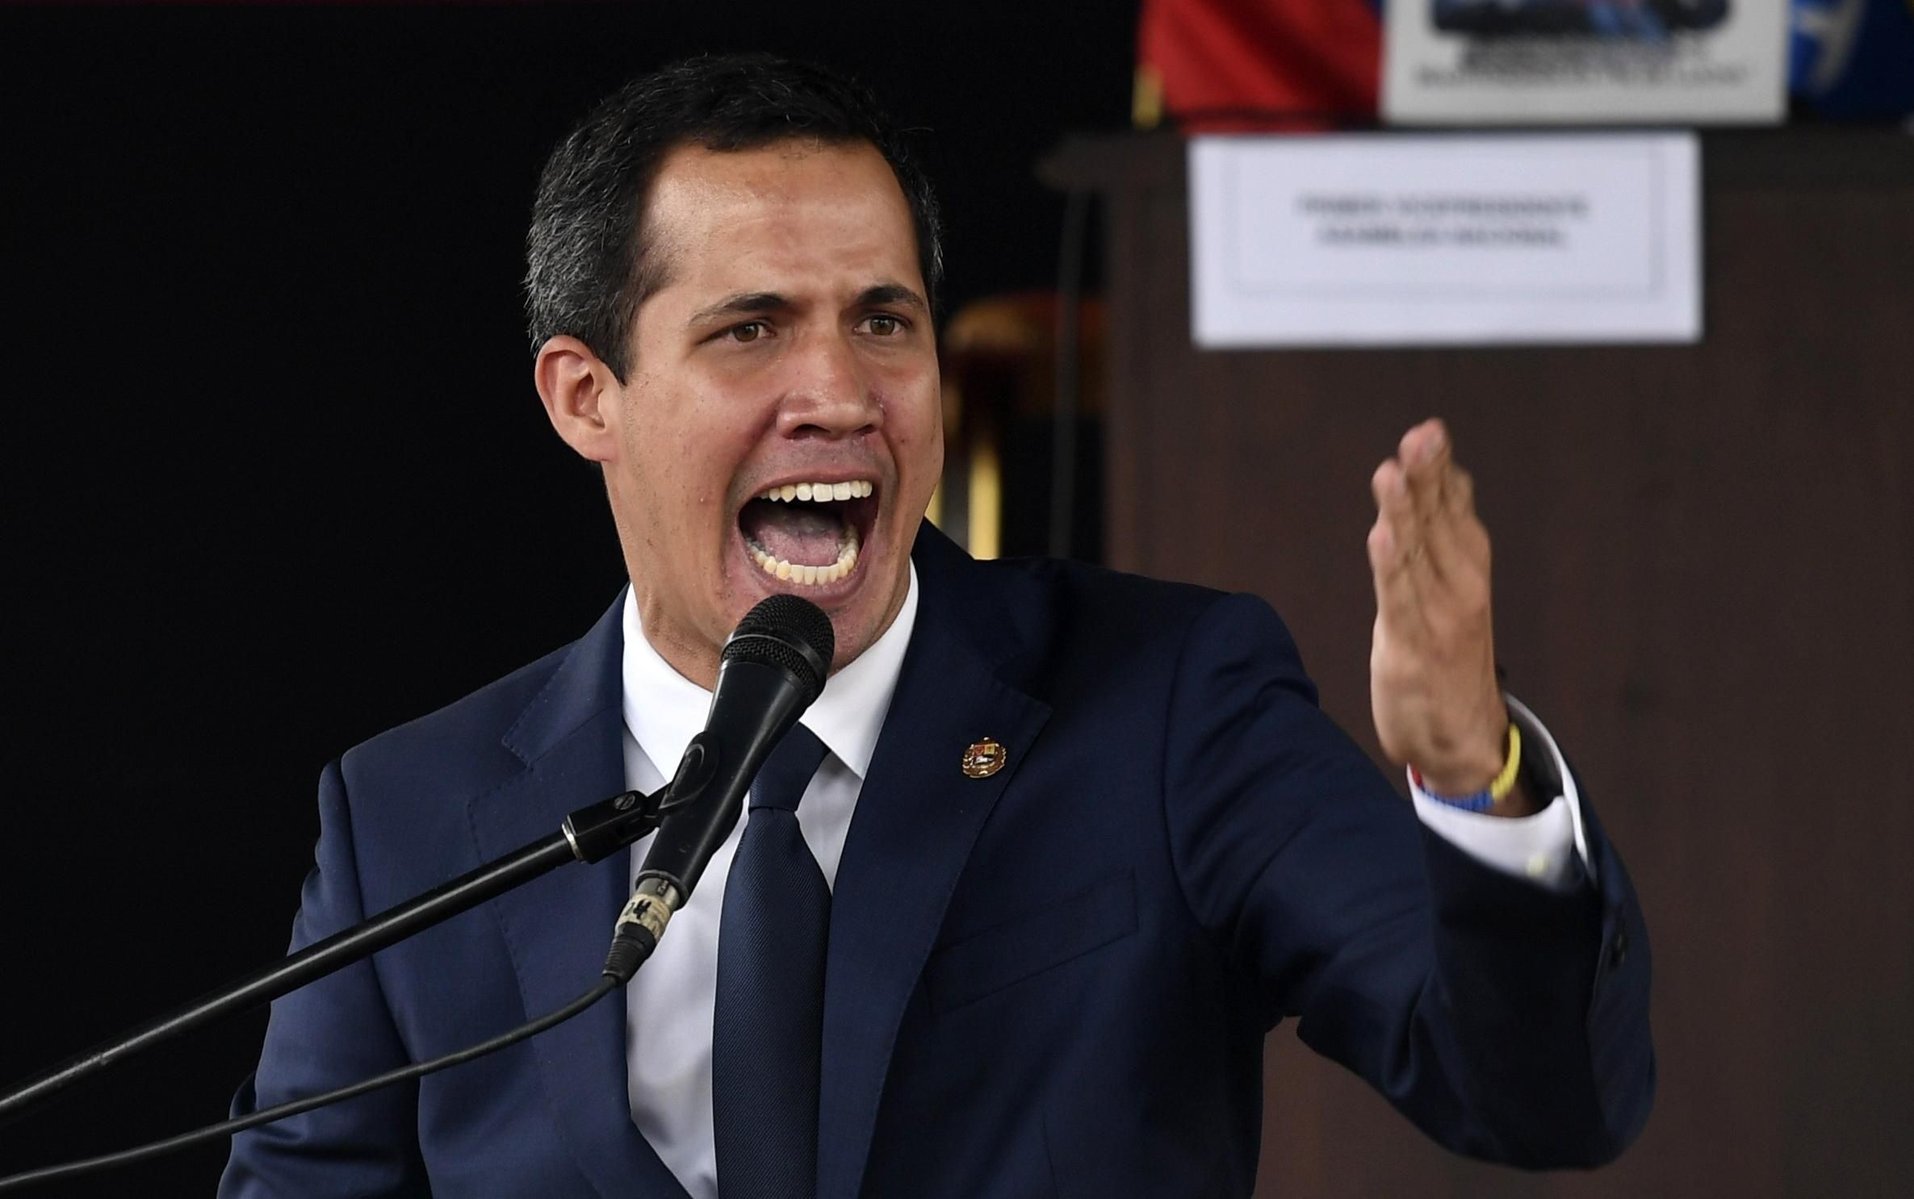 guaido-gettyimages-1157410858_crop1568769050617